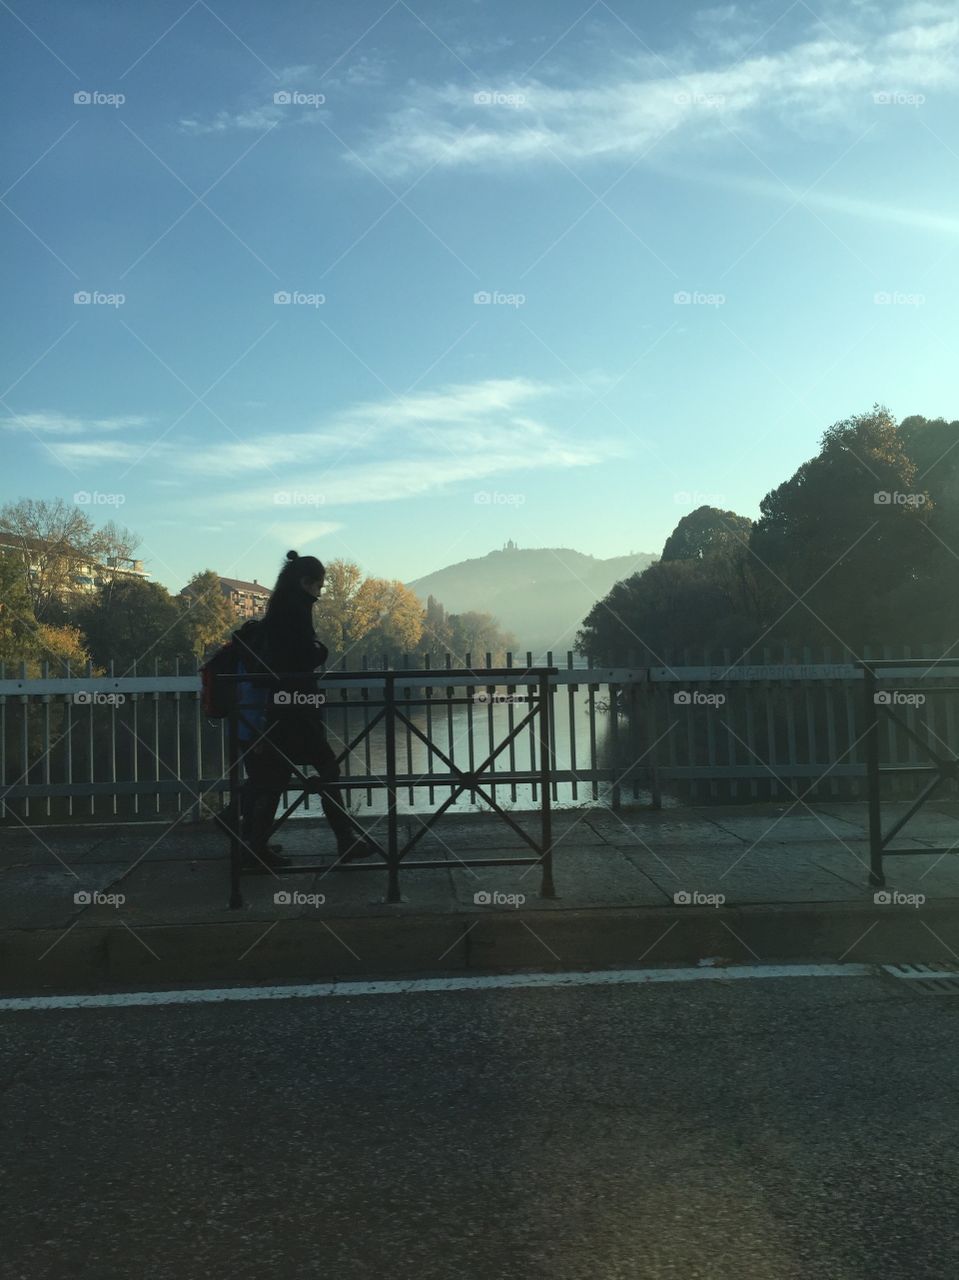 Sunrise in Turi . I'm leaving Italy and Turin and going to live in London. This is the last photo I took in Turin, driving to the airport 